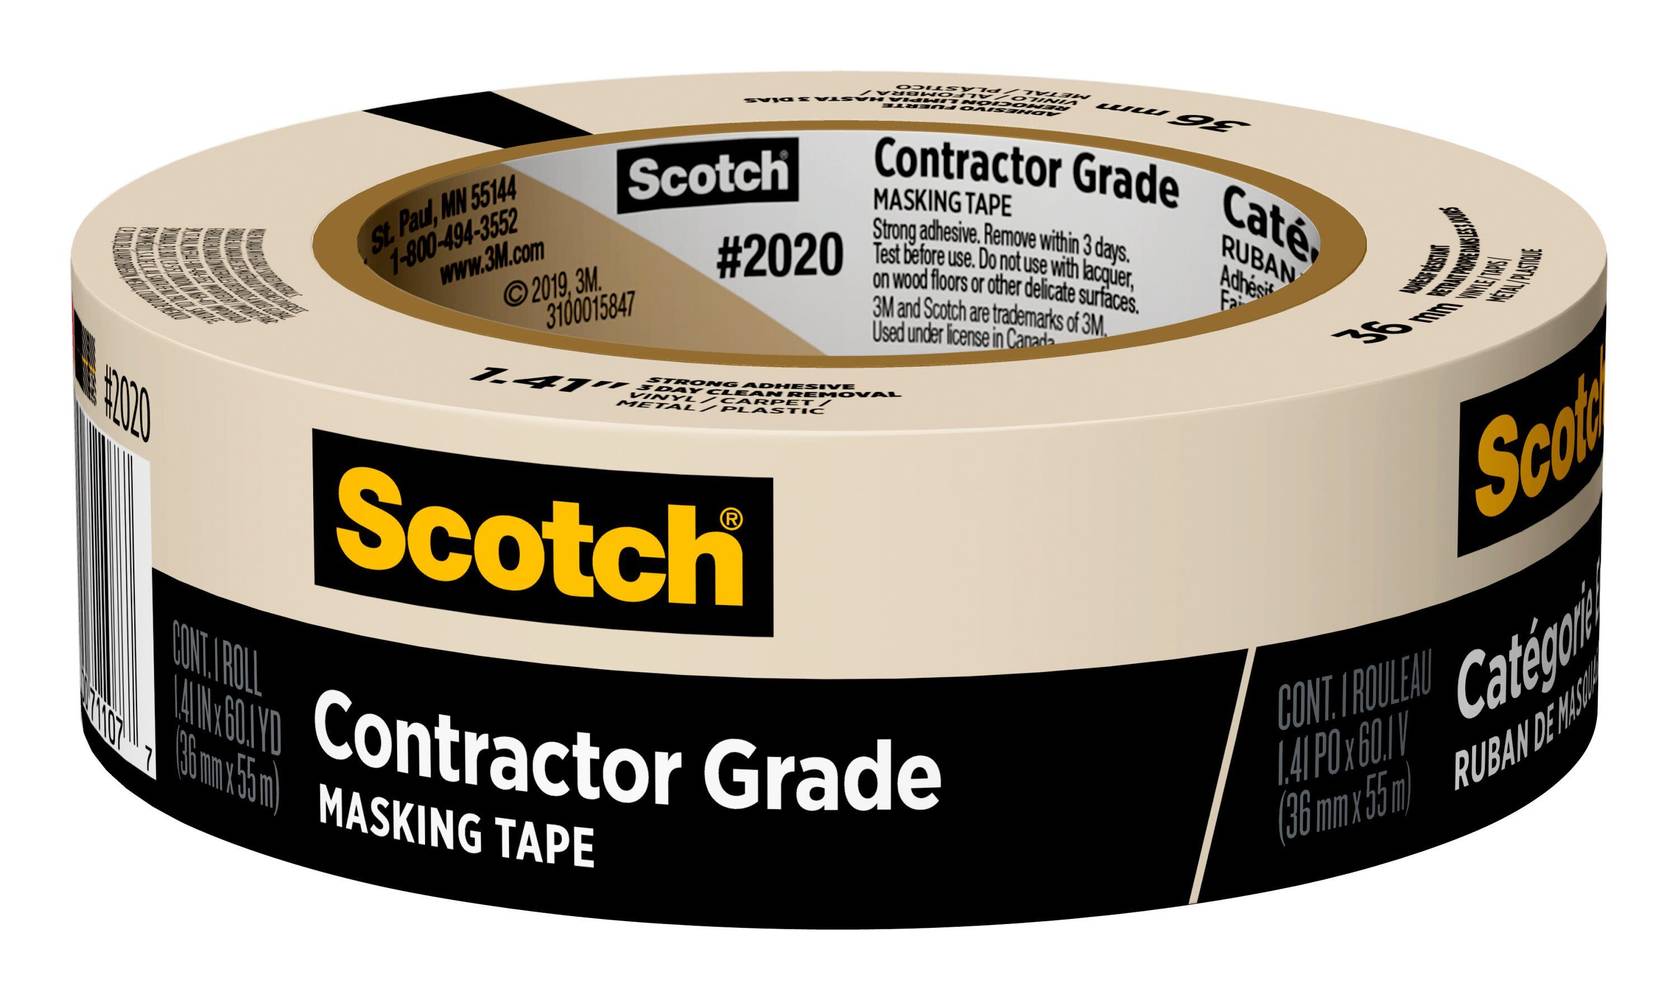 Scotch 2020 Contractor Grade 1.41-in x 60 Yard(s) Masking Tape | 2020-36AP